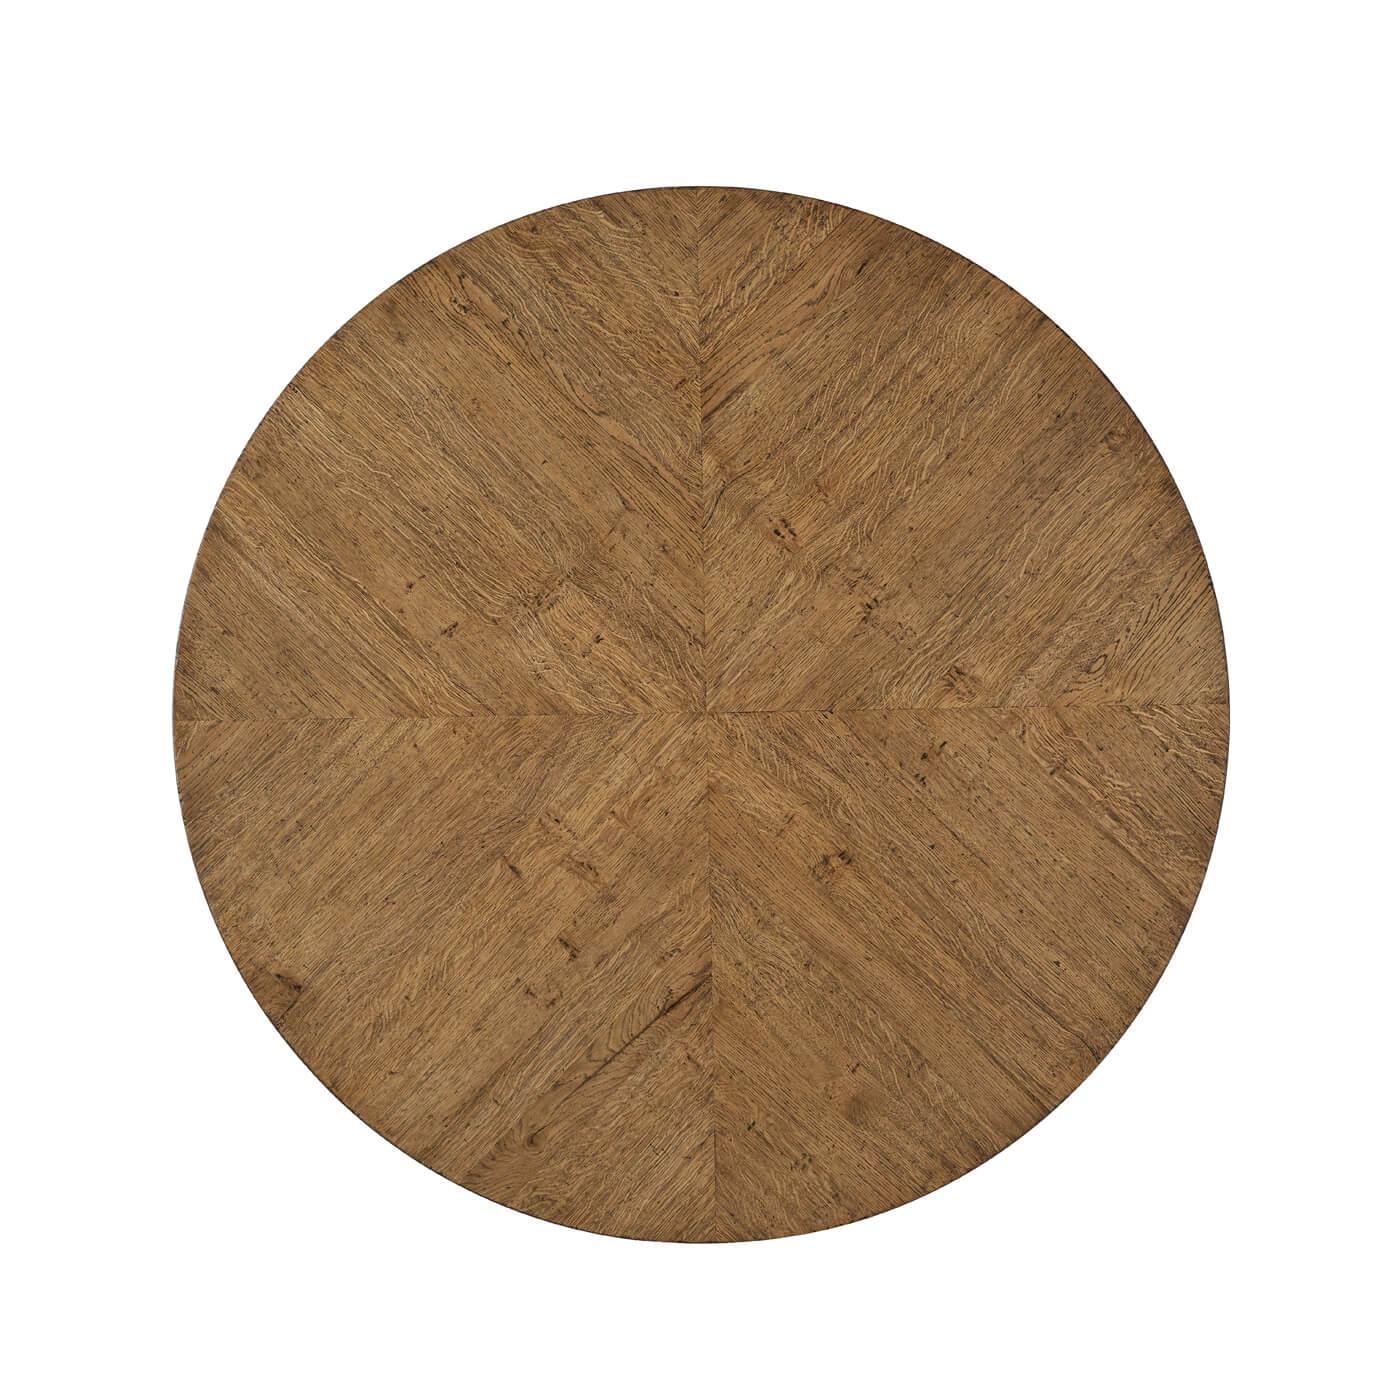 A rustic oak parquetry round dining table with column pyramid base. This elegant table is detailed with a herringbone oak parquetry base and radial veneered top. It has been hand-carved and given our Dawn finish.

Shown in dawn finish
Dimensions: